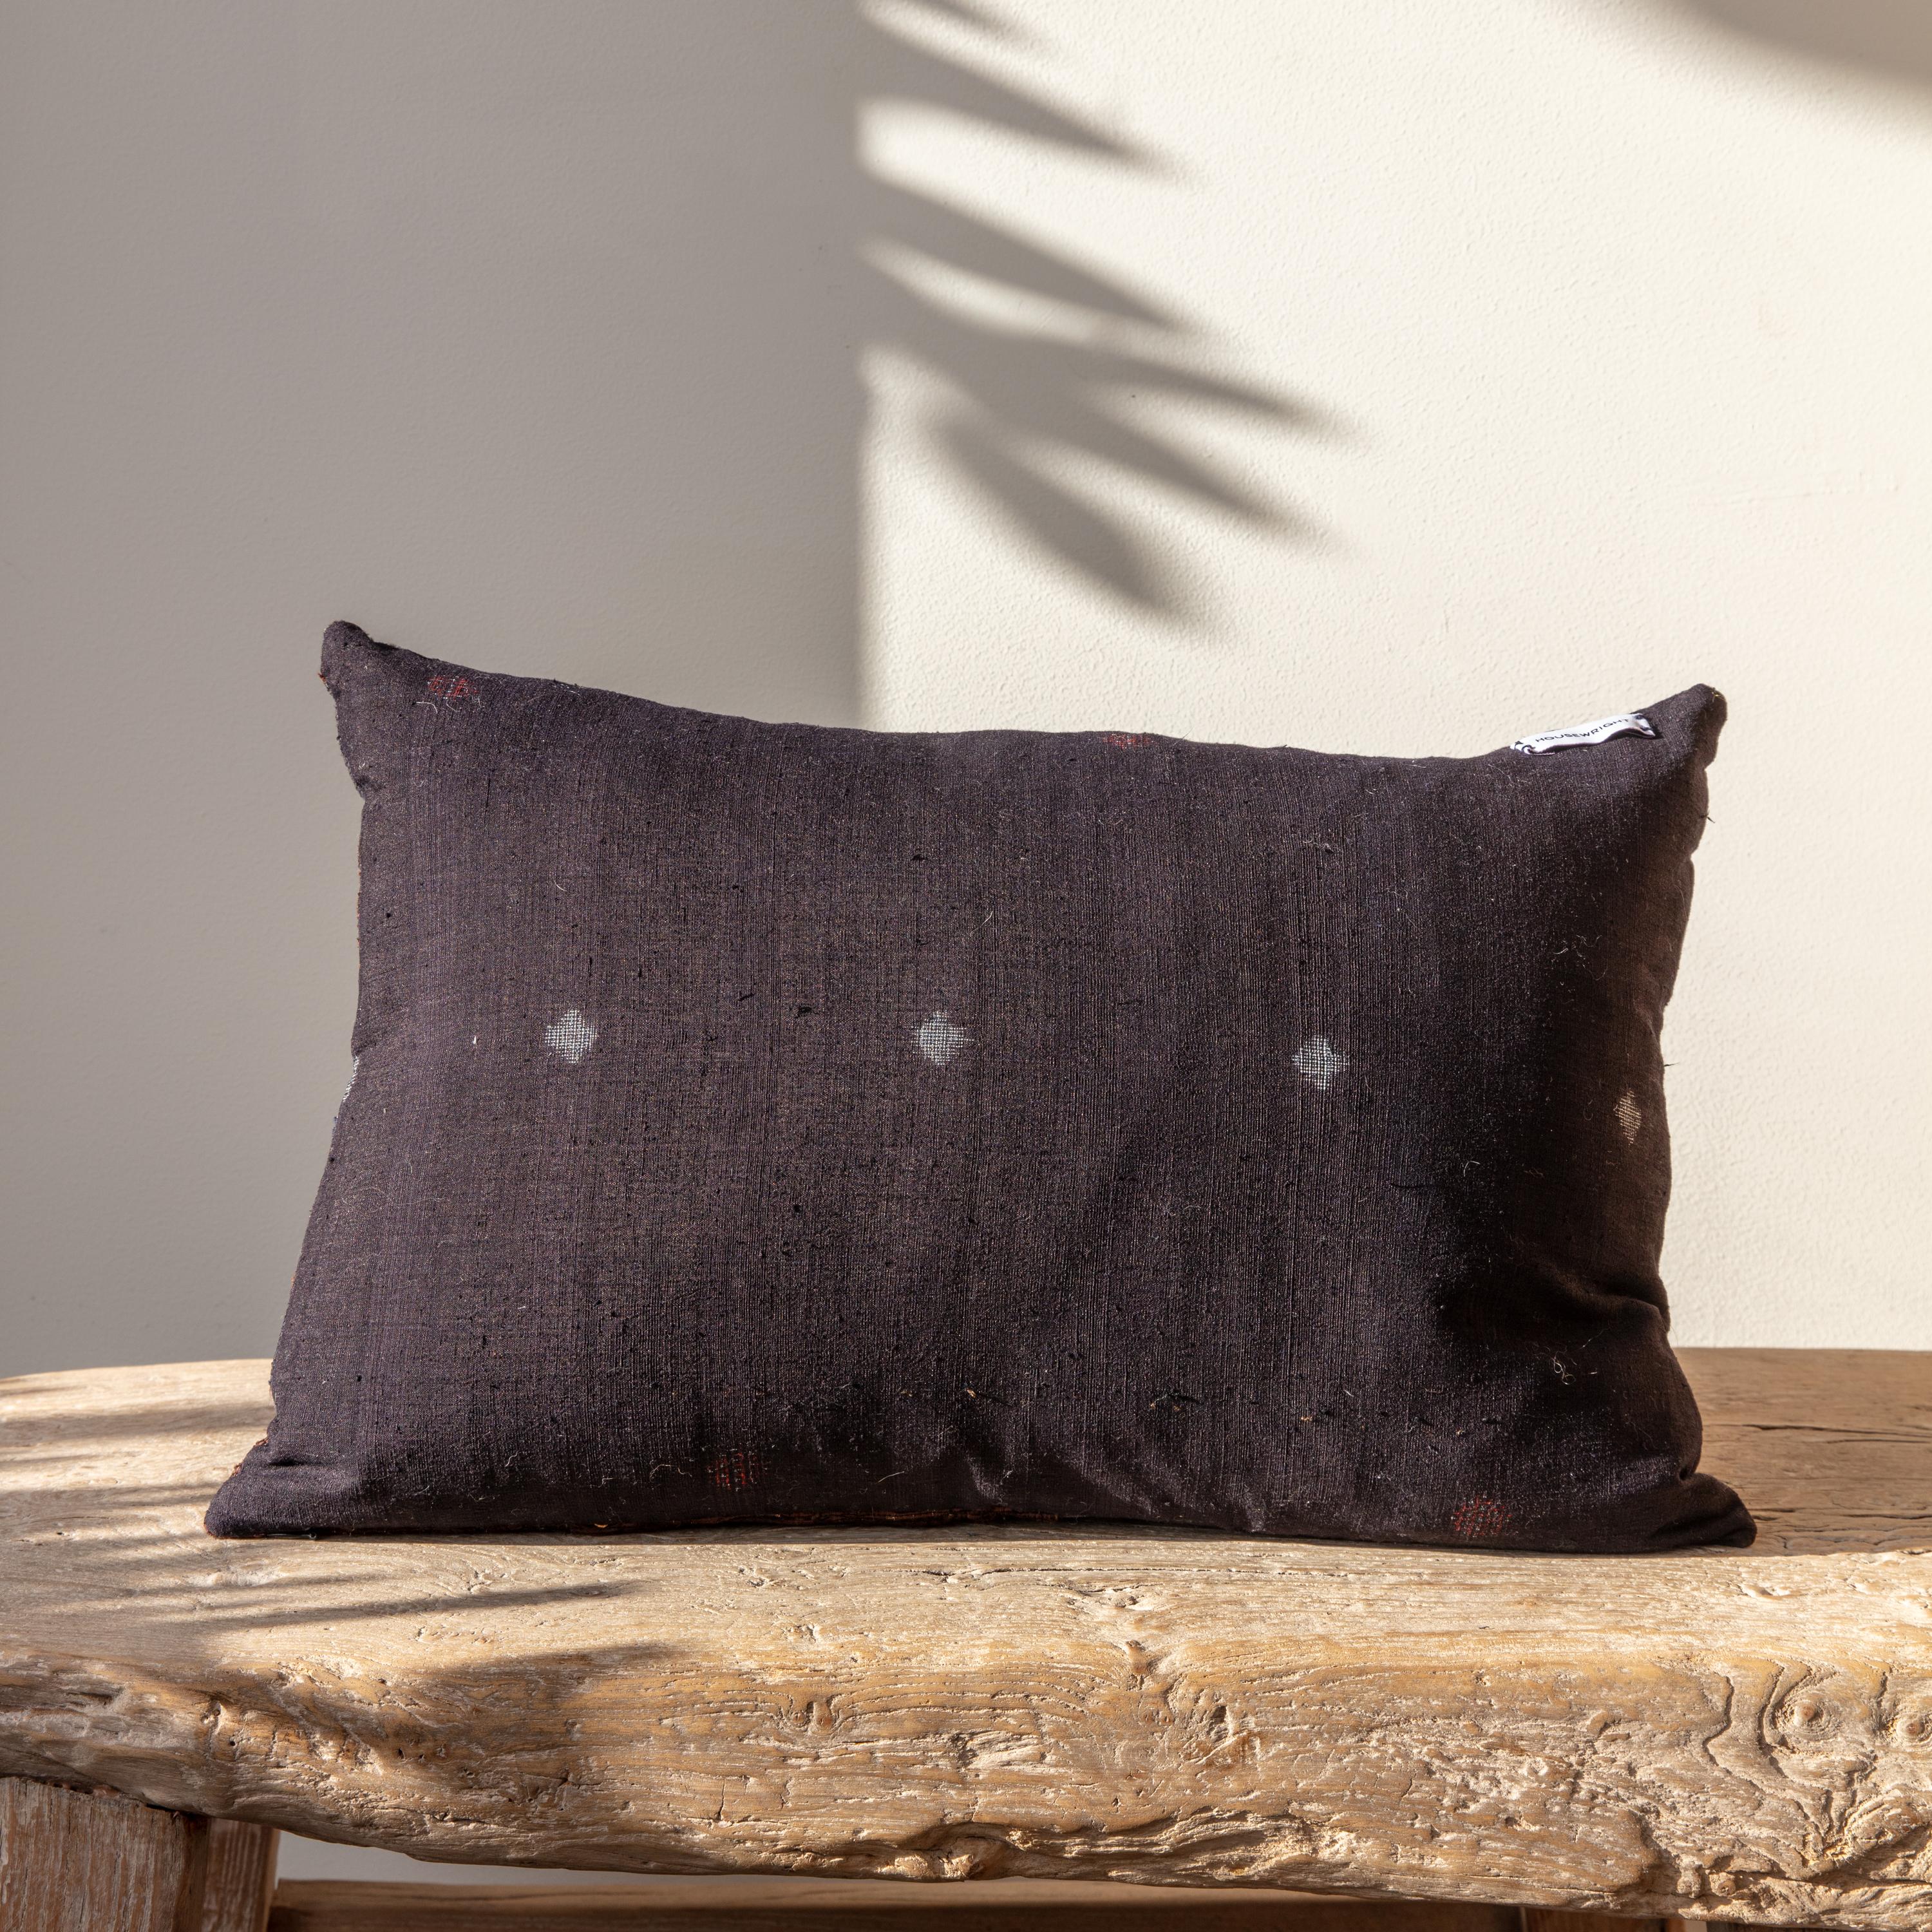 100% down fill, zipper closures.</p>
Dry-clean only.</p>
Handmade in Seattle, WA.</p>
Each one-of-a-kind pillow is handcrafted in the Pacific Northwest with unexpected details from hardware to seams and selvage.</p>